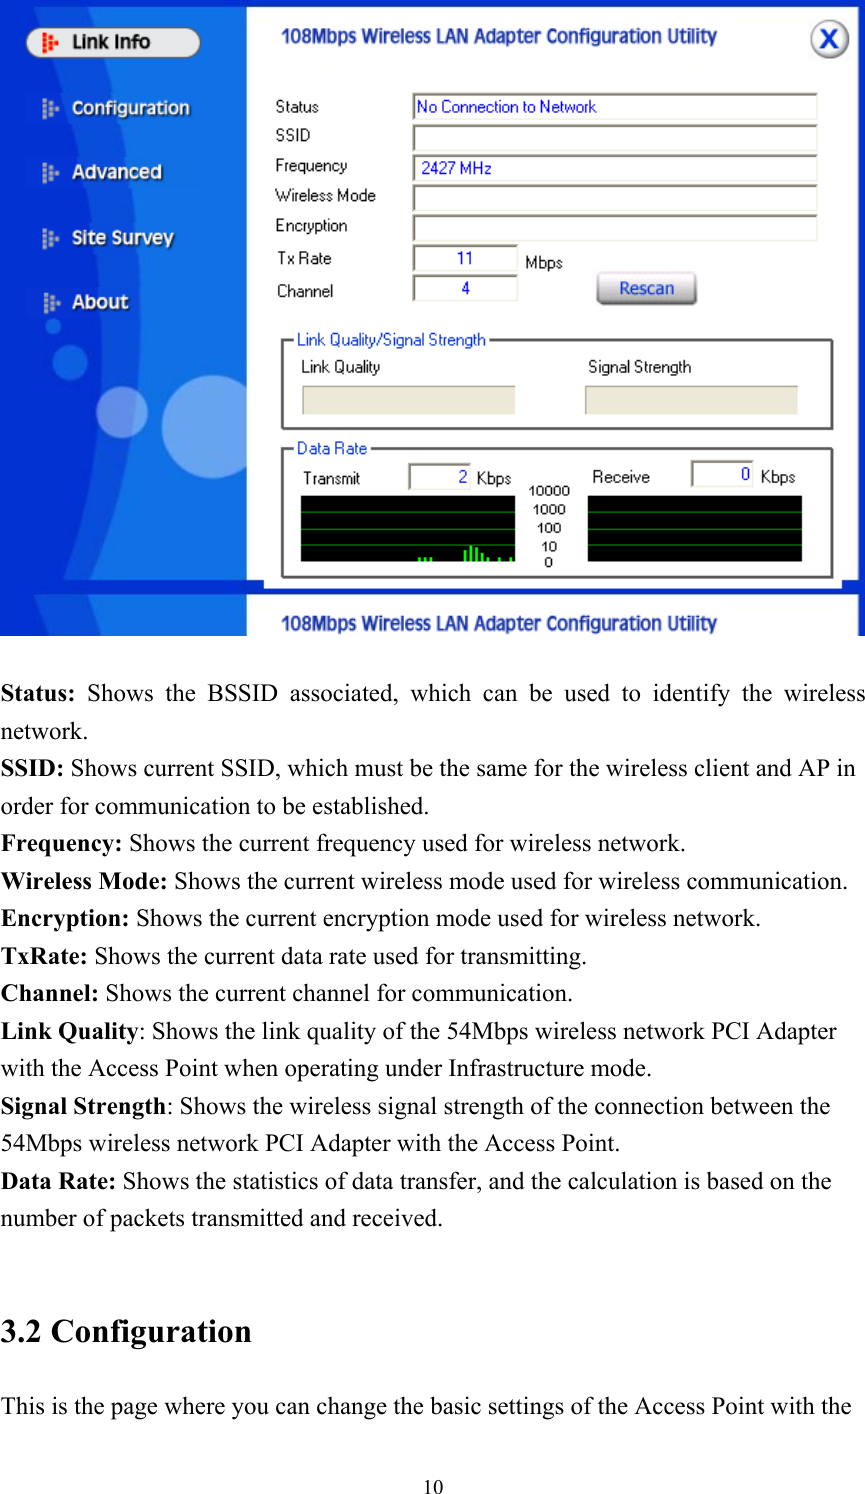  10  Status:  Shows the BSSID associated, which can be used to identify the wireless network. SSID: Shows current SSID, which must be the same for the wireless client and AP in order for communication to be established. Frequency: Shows the current frequency used for wireless network. Wireless Mode: Shows the current wireless mode used for wireless communication. Encryption: Shows the current encryption mode used for wireless network. TxRate: Shows the current data rate used for transmitting. Channel: Shows the current channel for communication. Link Quality: Shows the link quality of the 54Mbps wireless network PCI Adapter with the Access Point when operating under Infrastructure mode. Signal Strength: Shows the wireless signal strength of the connection between the 54Mbps wireless network PCI Adapter with the Access Point. Data Rate: Shows the statistics of data transfer, and the calculation is based on the number of packets transmitted and received.  3.2 Configuration This is the page where you can change the basic settings of the Access Point with the 